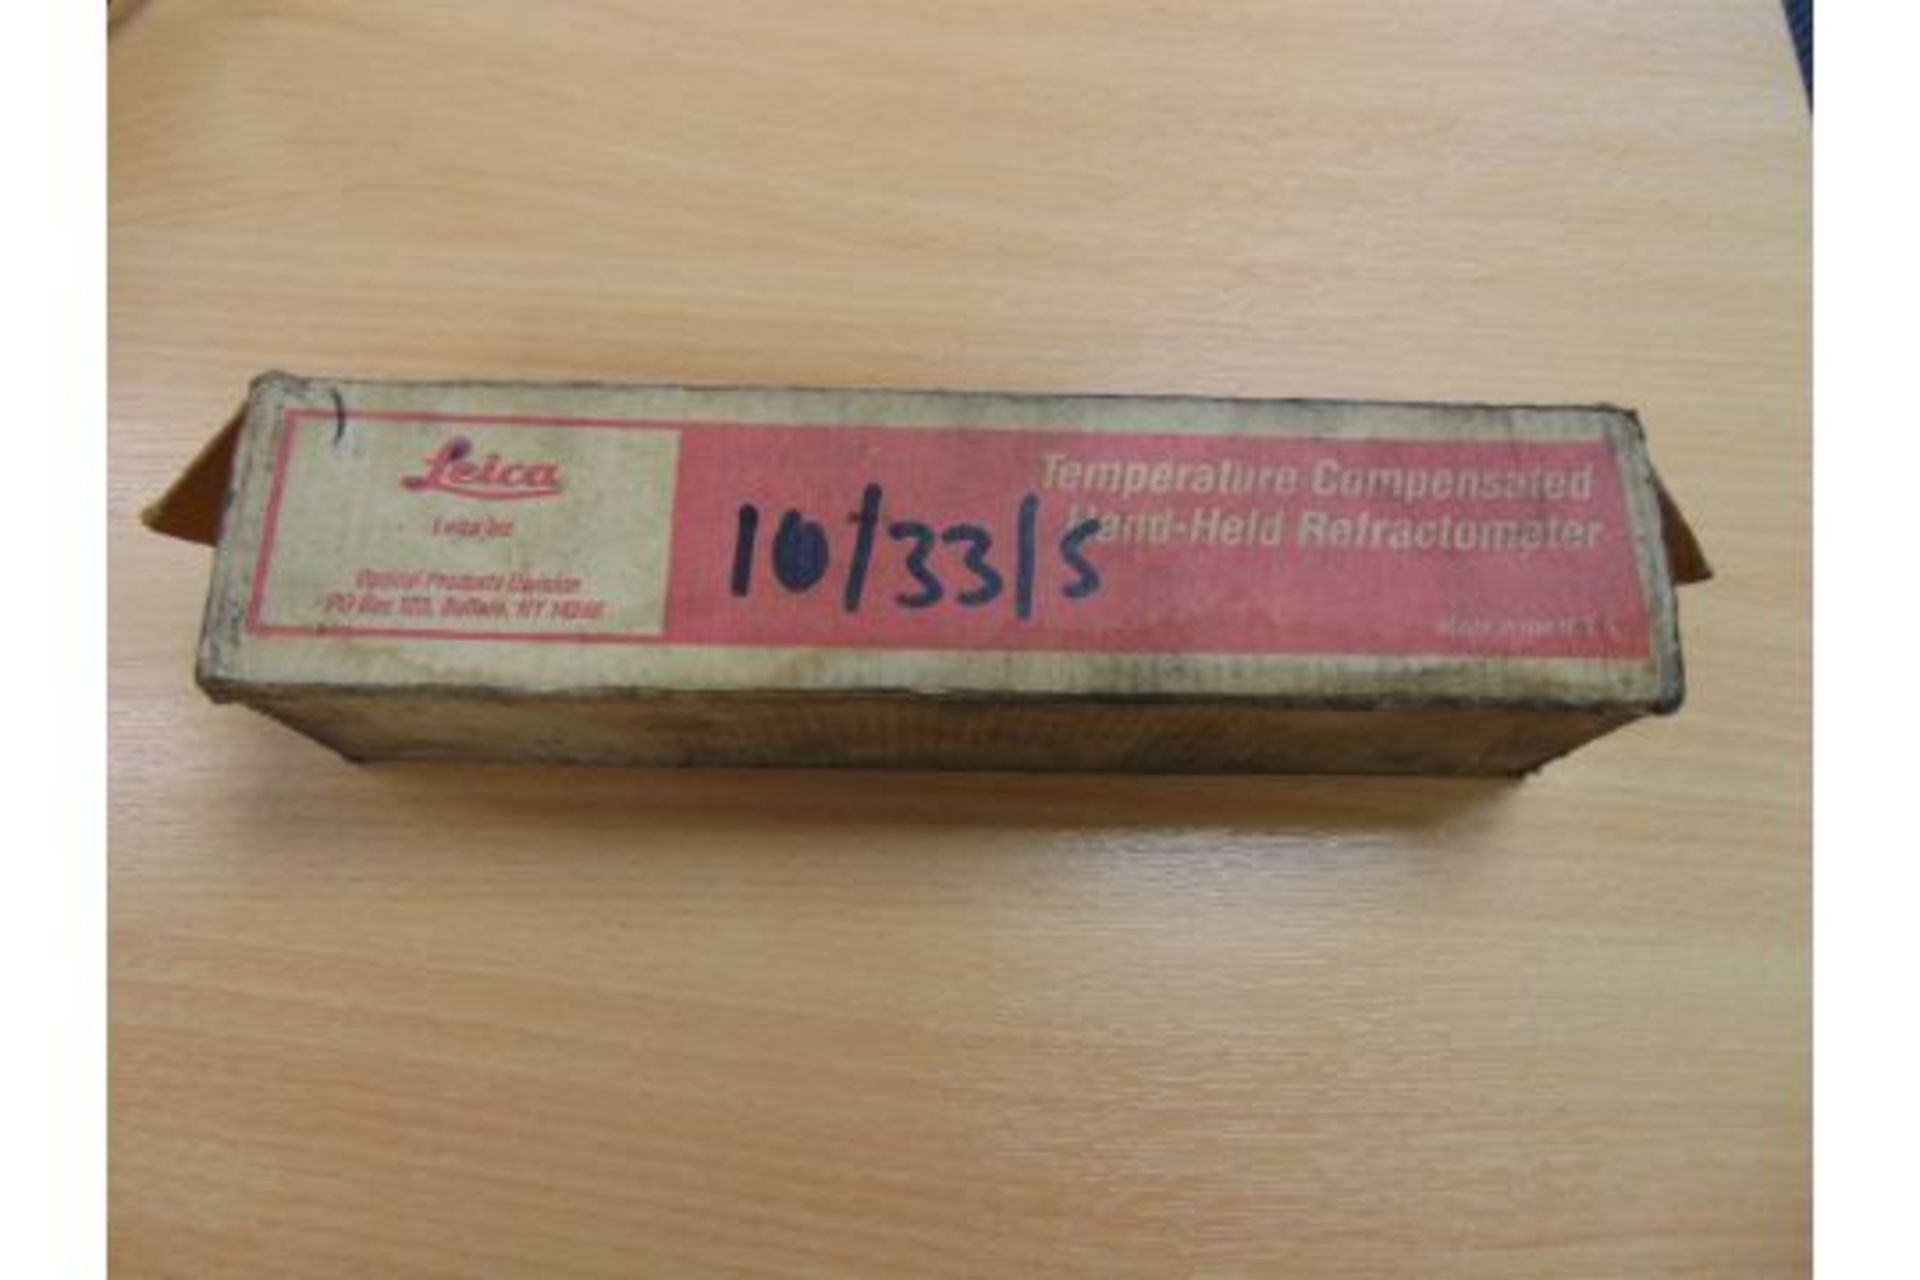 1 x Leica D60 Duo-Check Refractometer original packing with instructions - Image 9 of 9